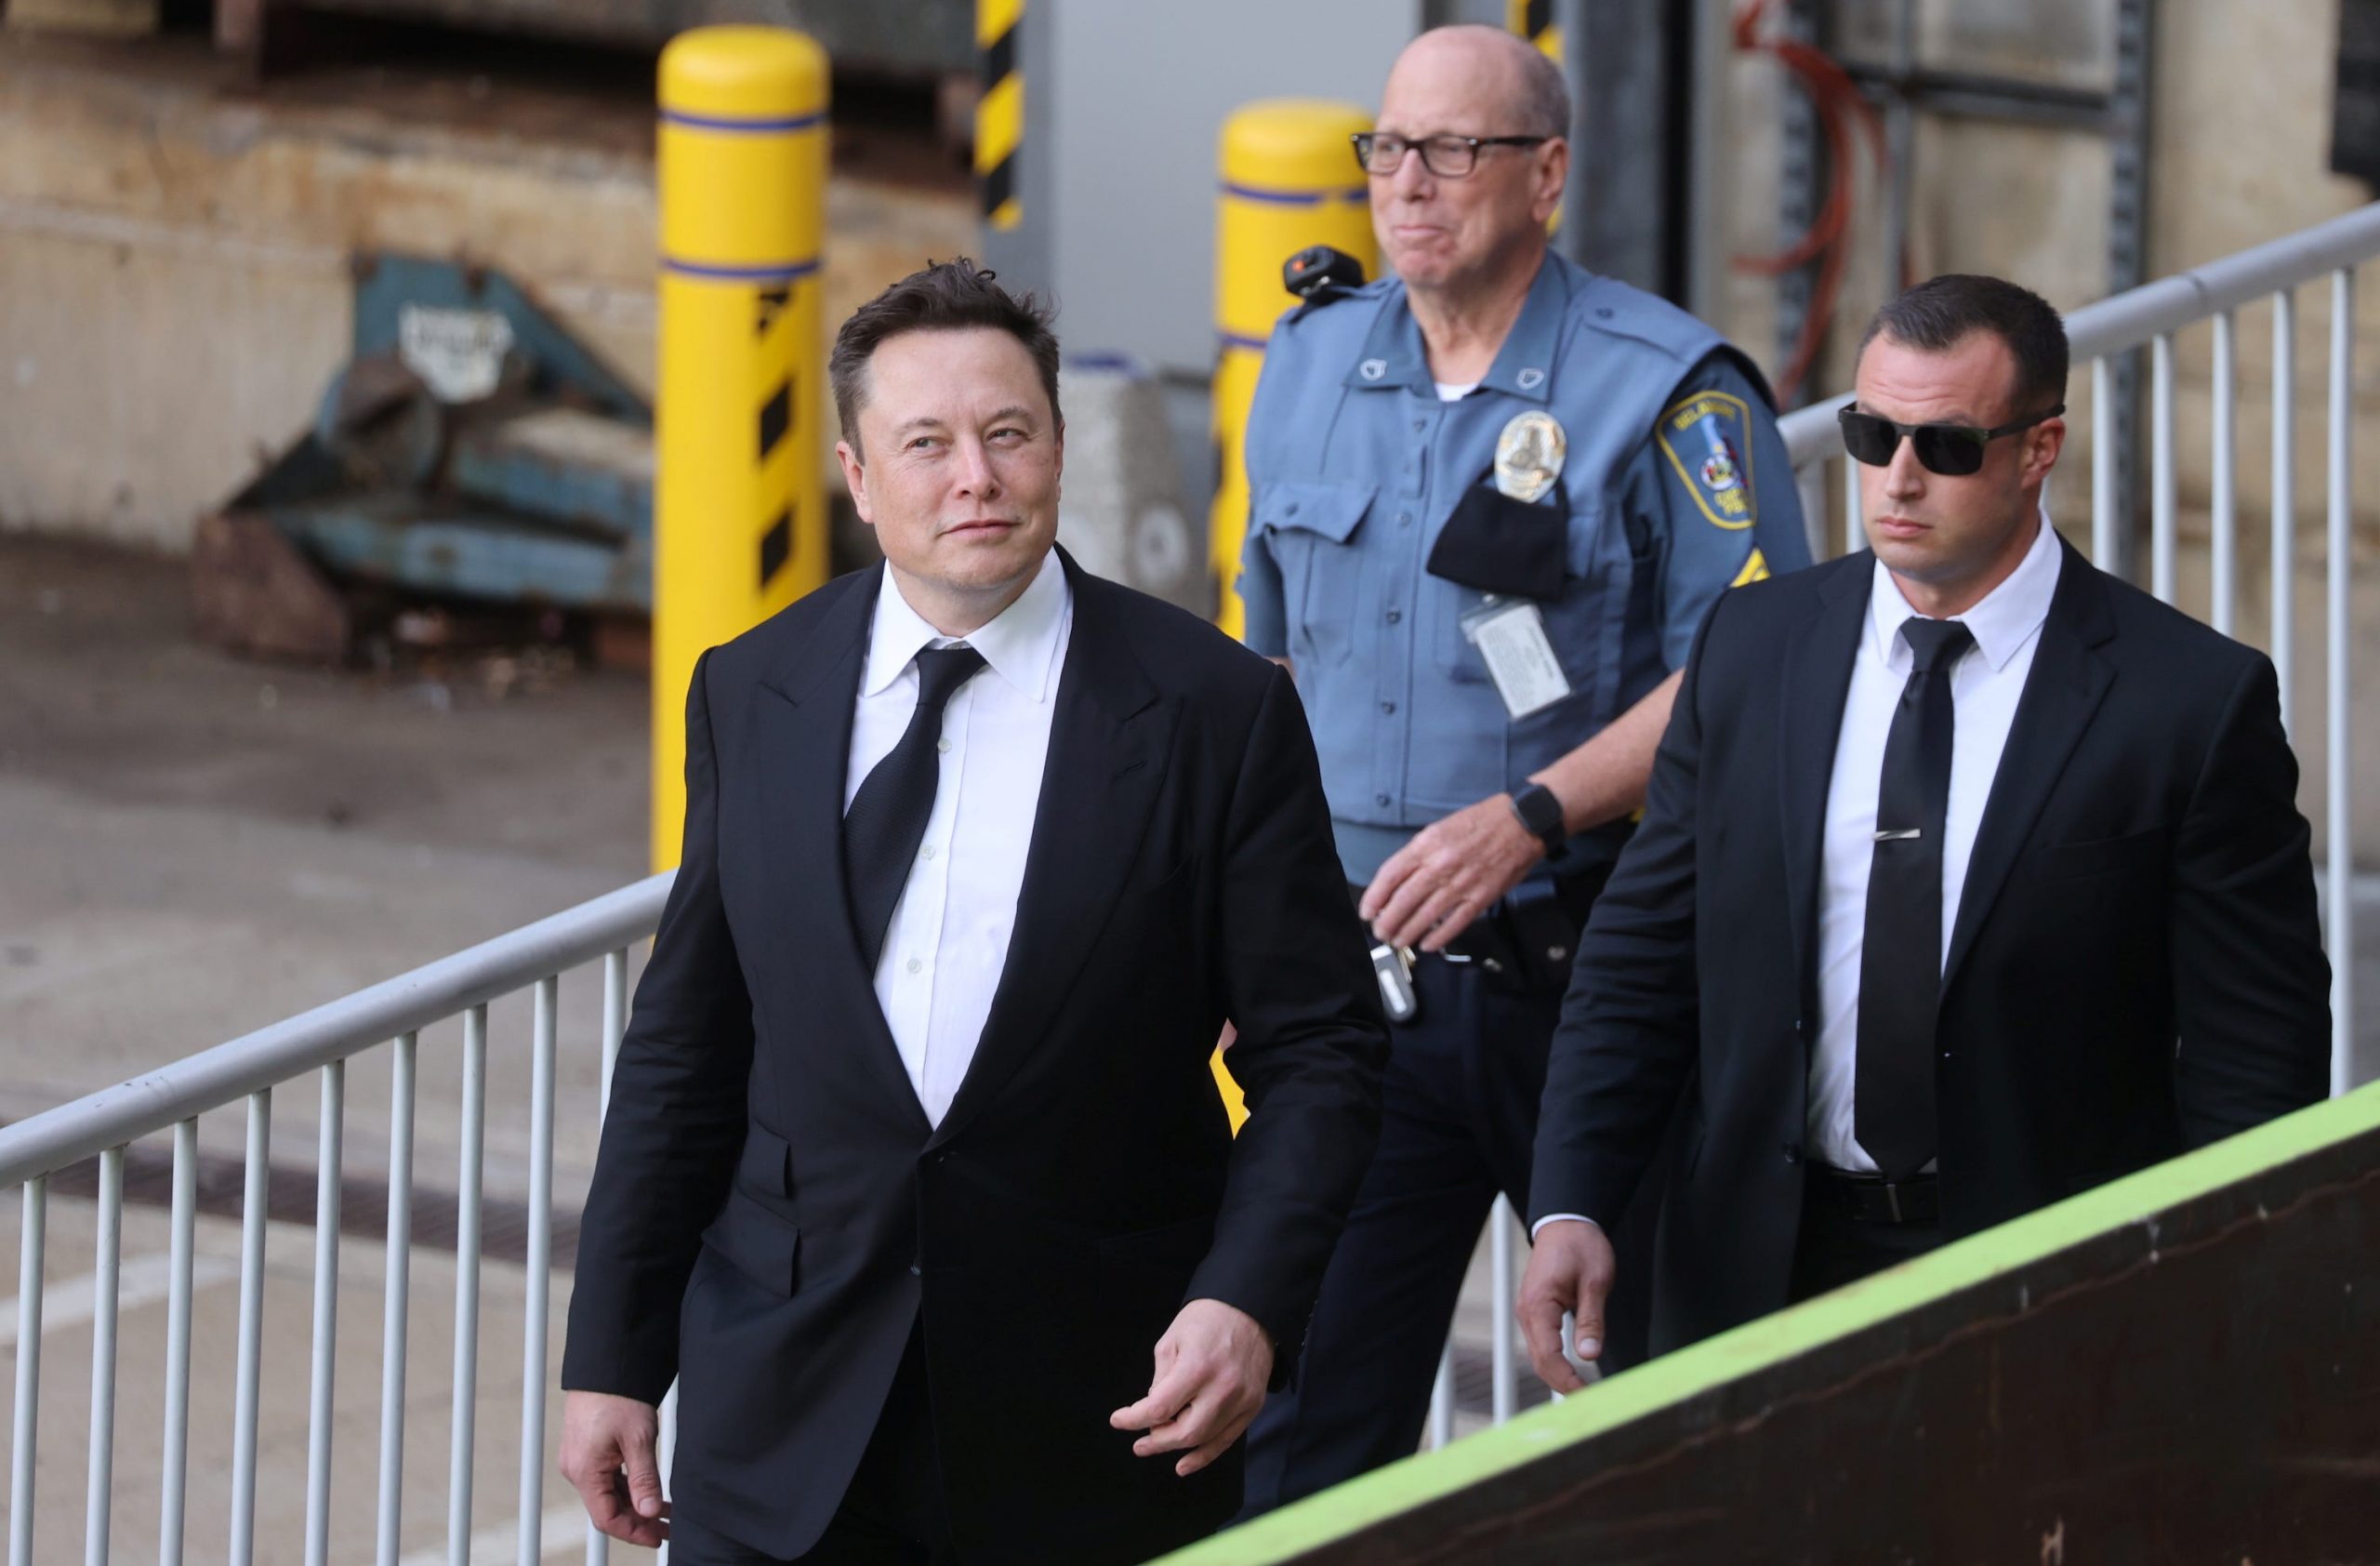 Elon Musk arrives at the Delaware Court of Chancery.